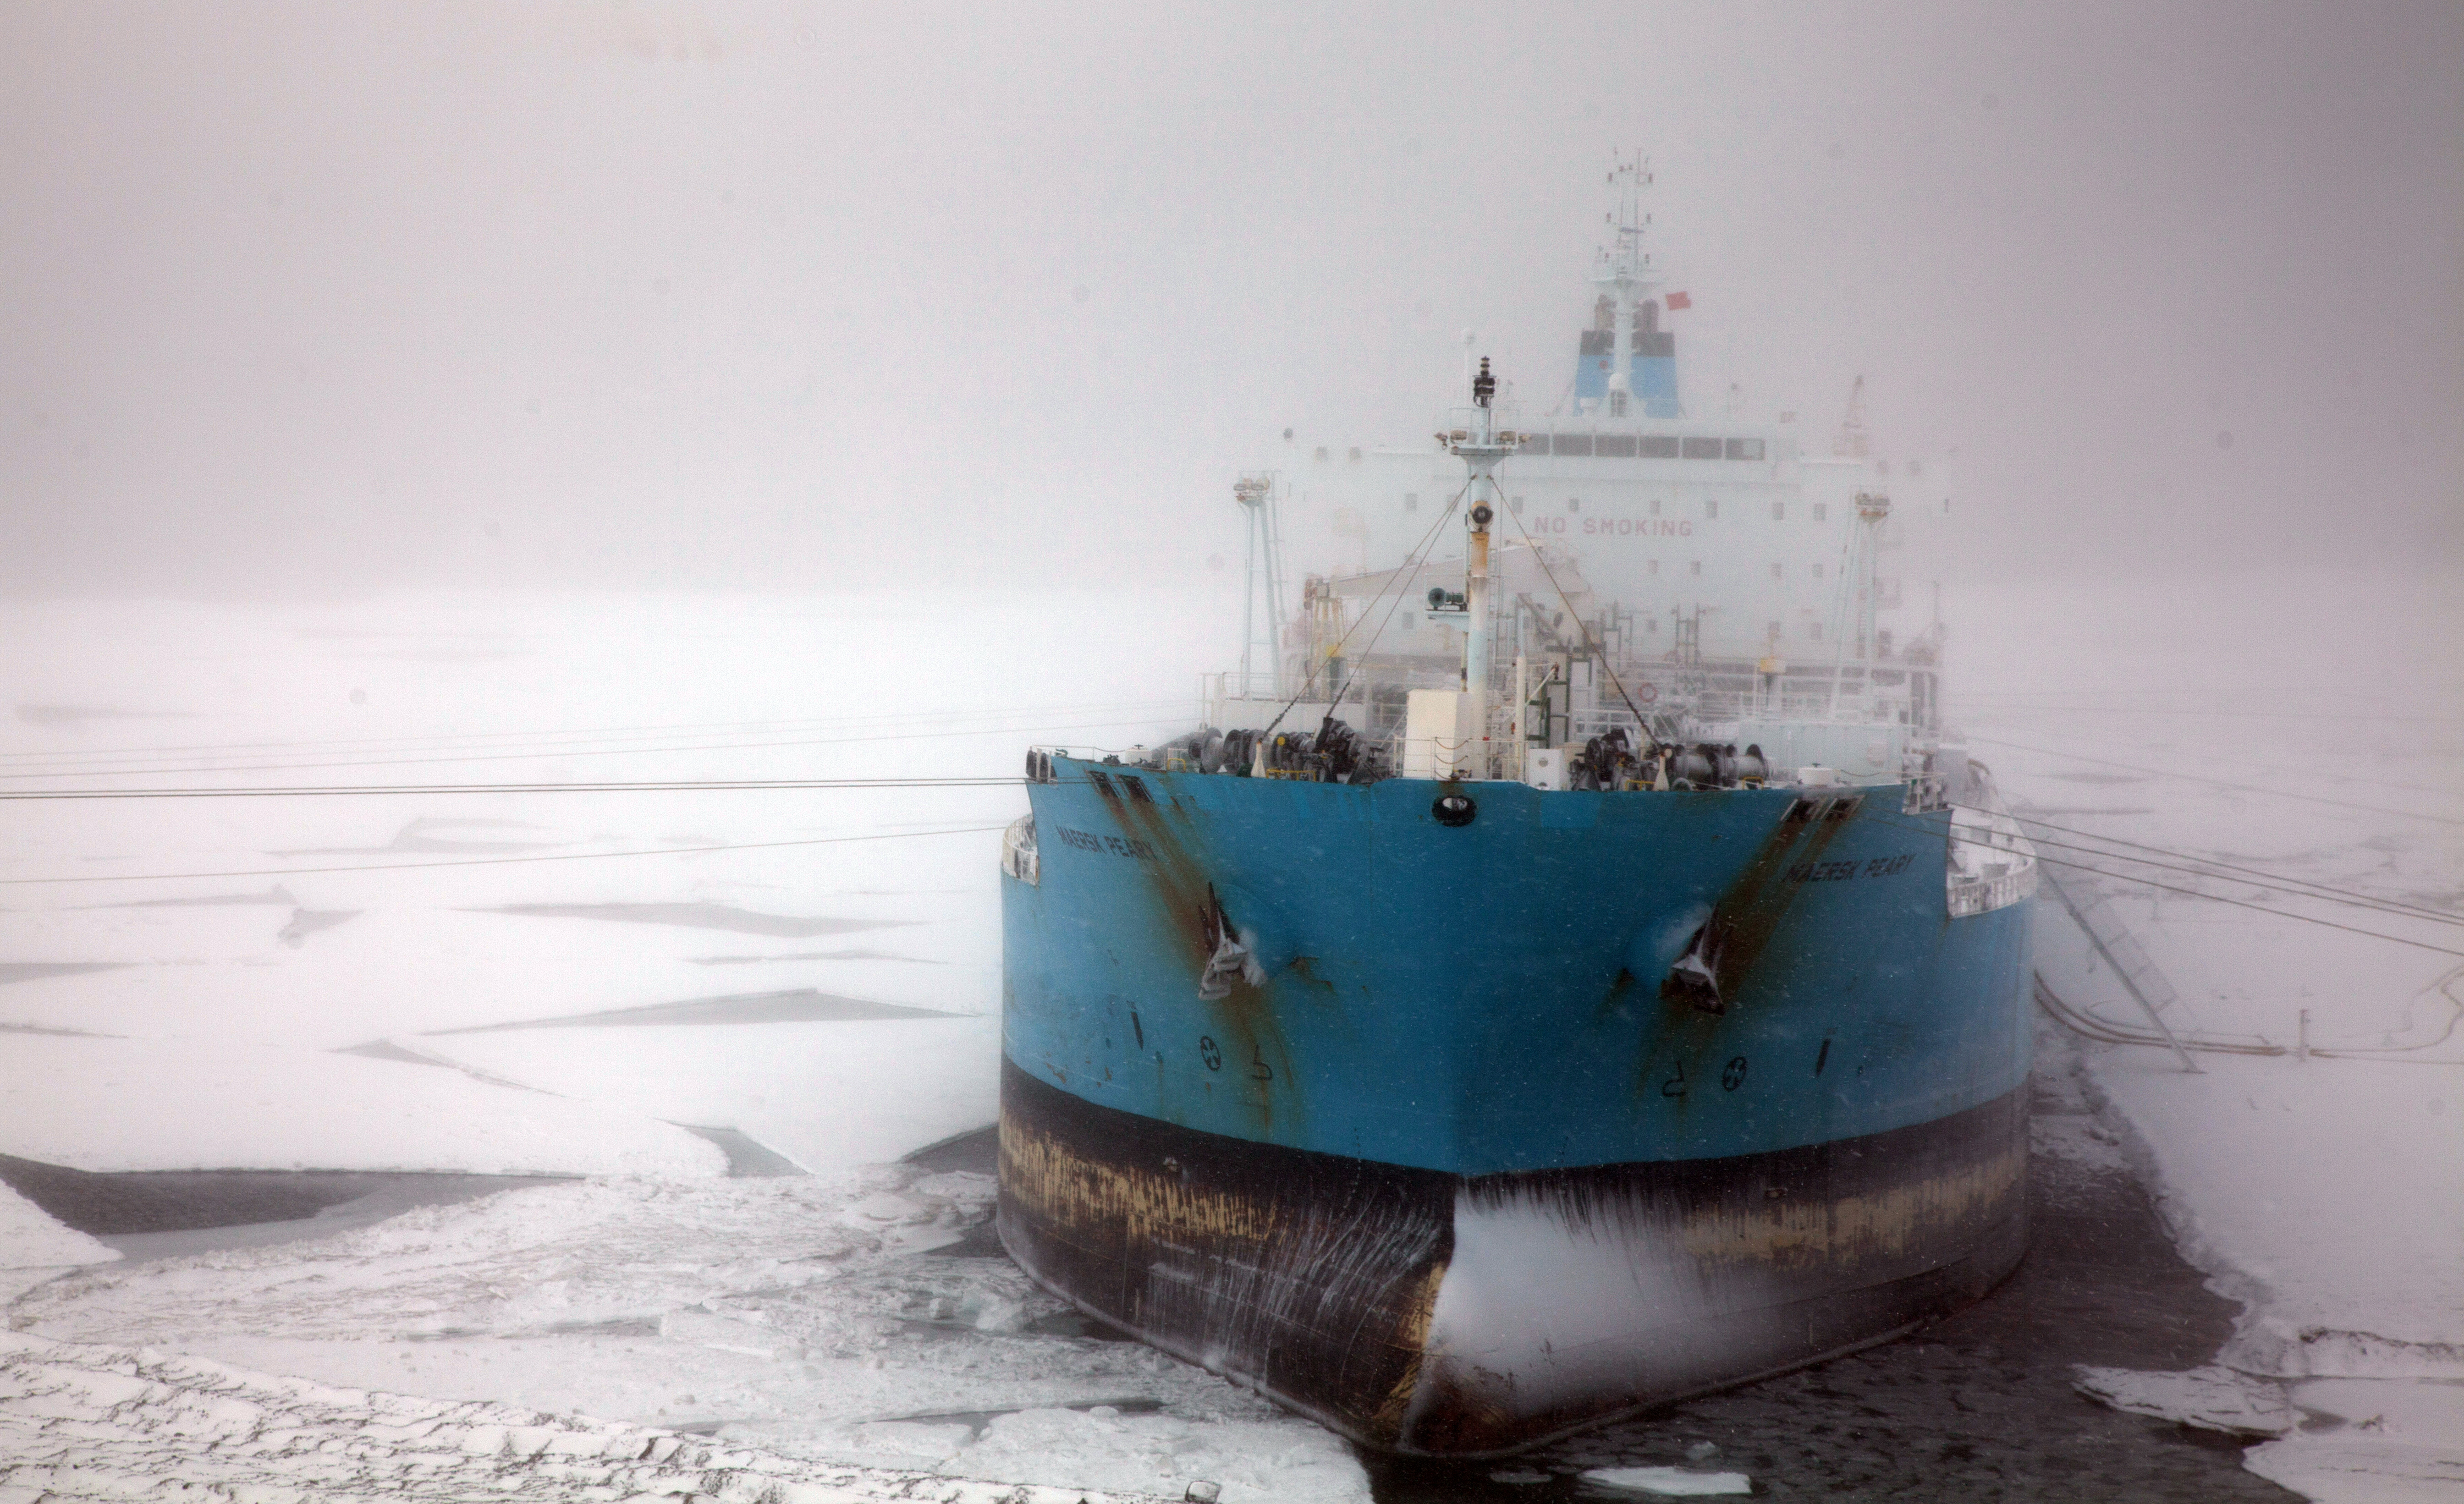 Storm rages around ship docked in ice.